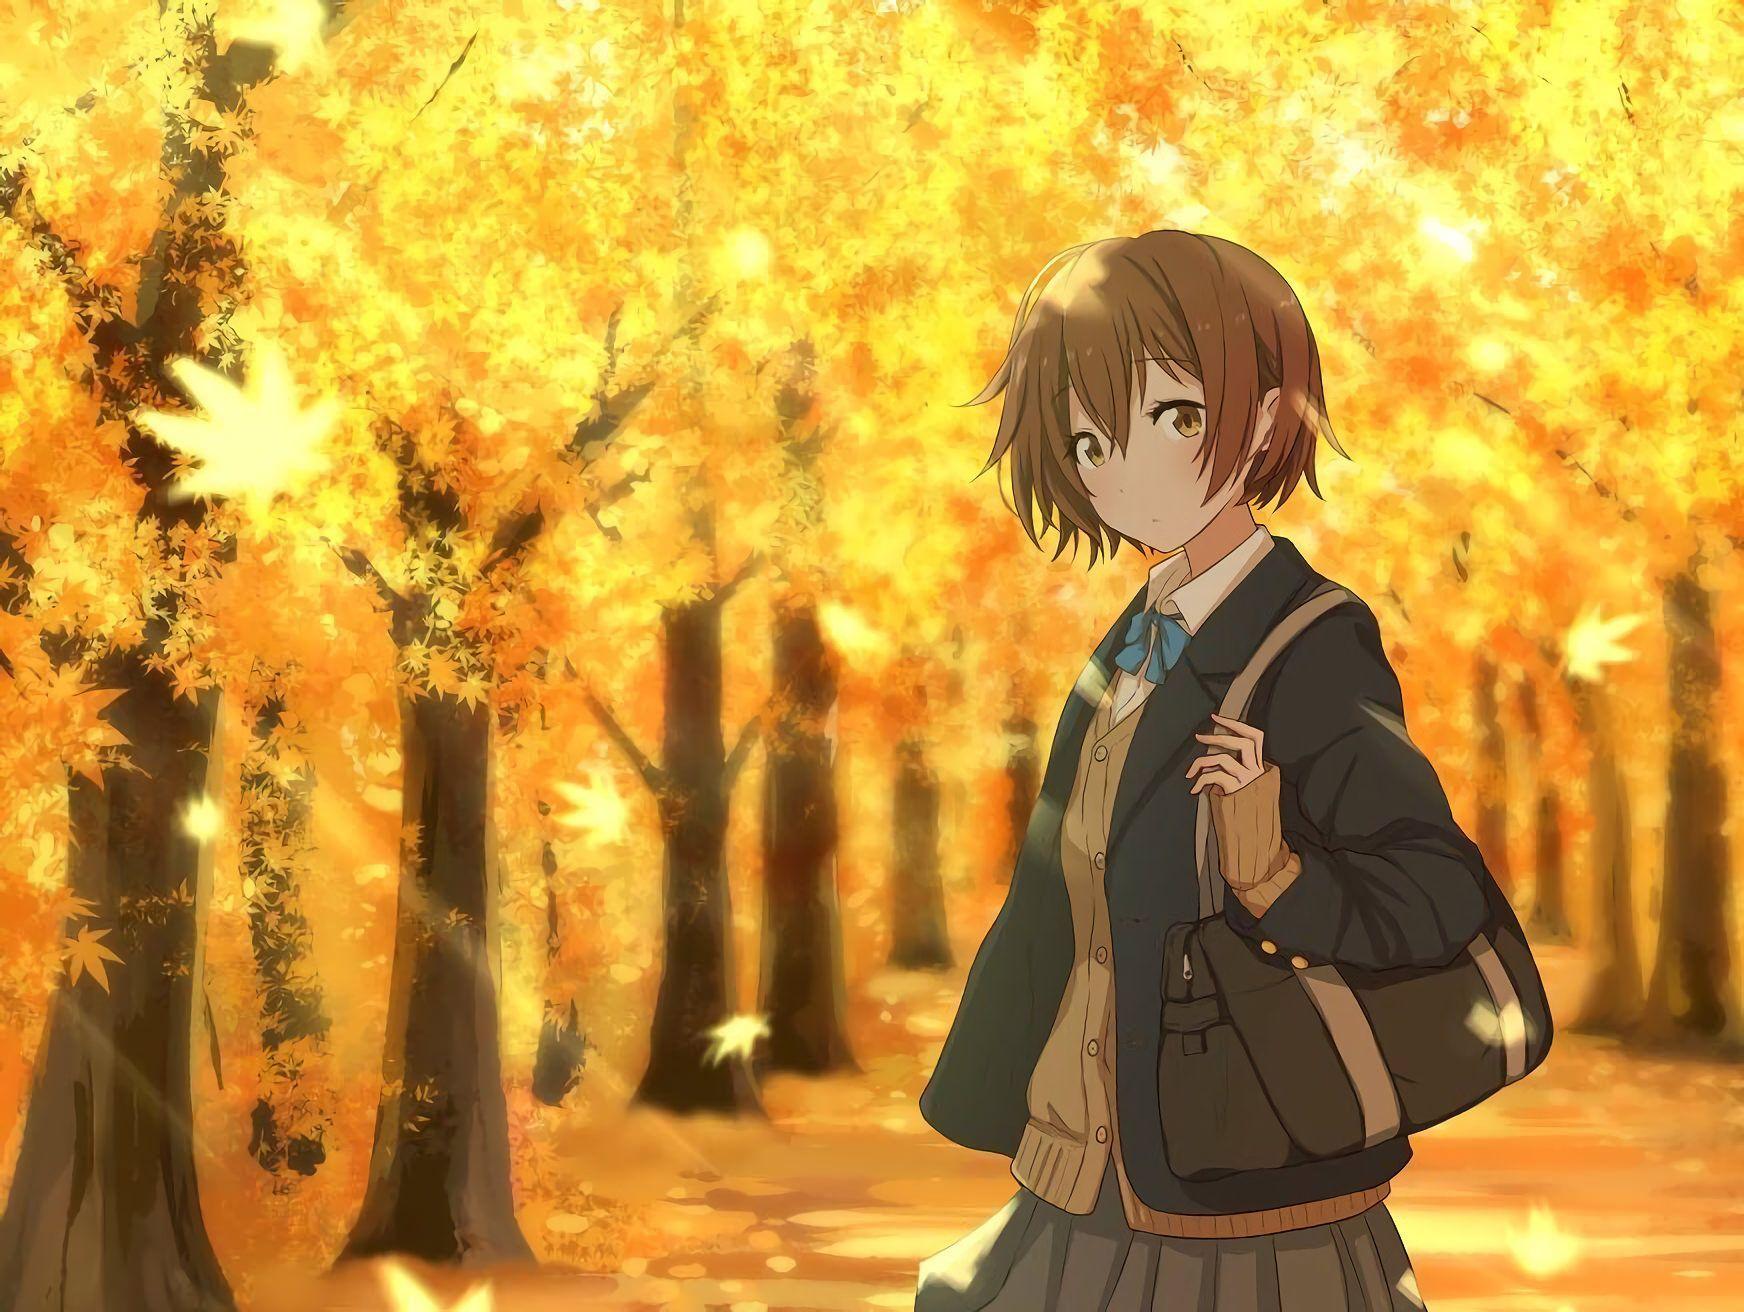 1886 Fall Anime Images Stock Photos  Vectors  Shutterstock